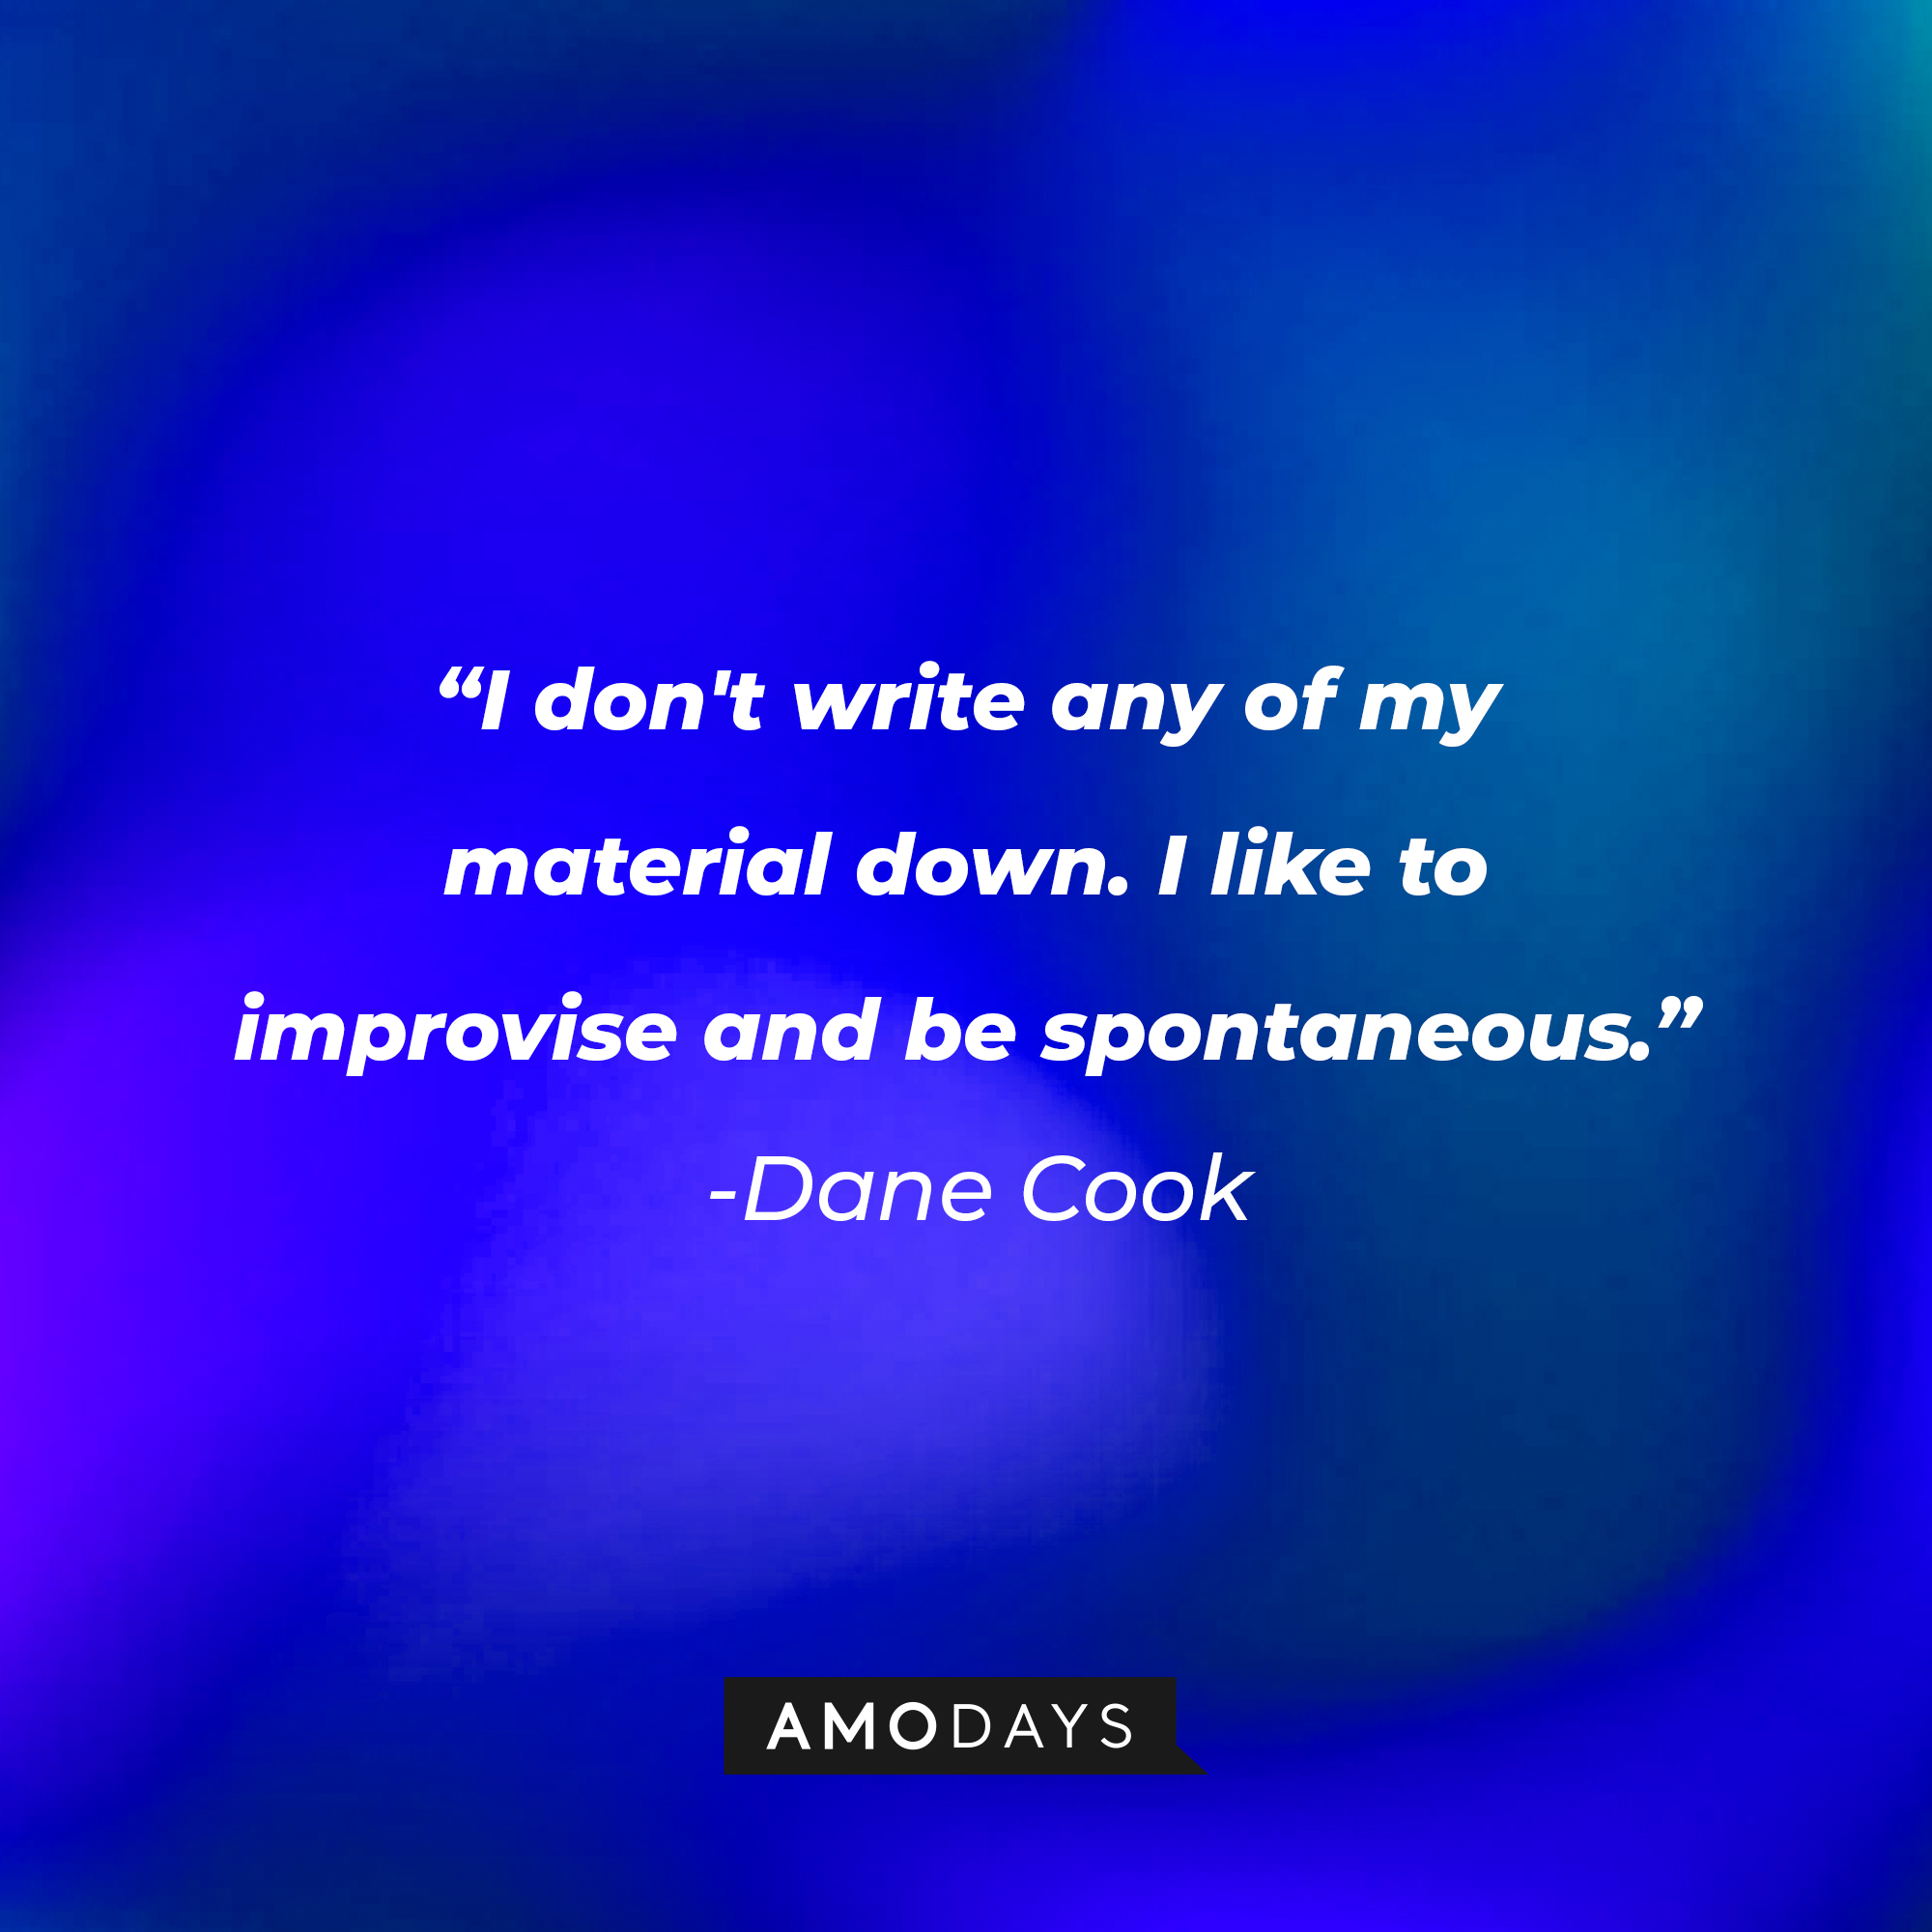 Dane Cook's quote: “I don't write any of my material down. I like to improvise and be spontaneous.” | Source: Amodays